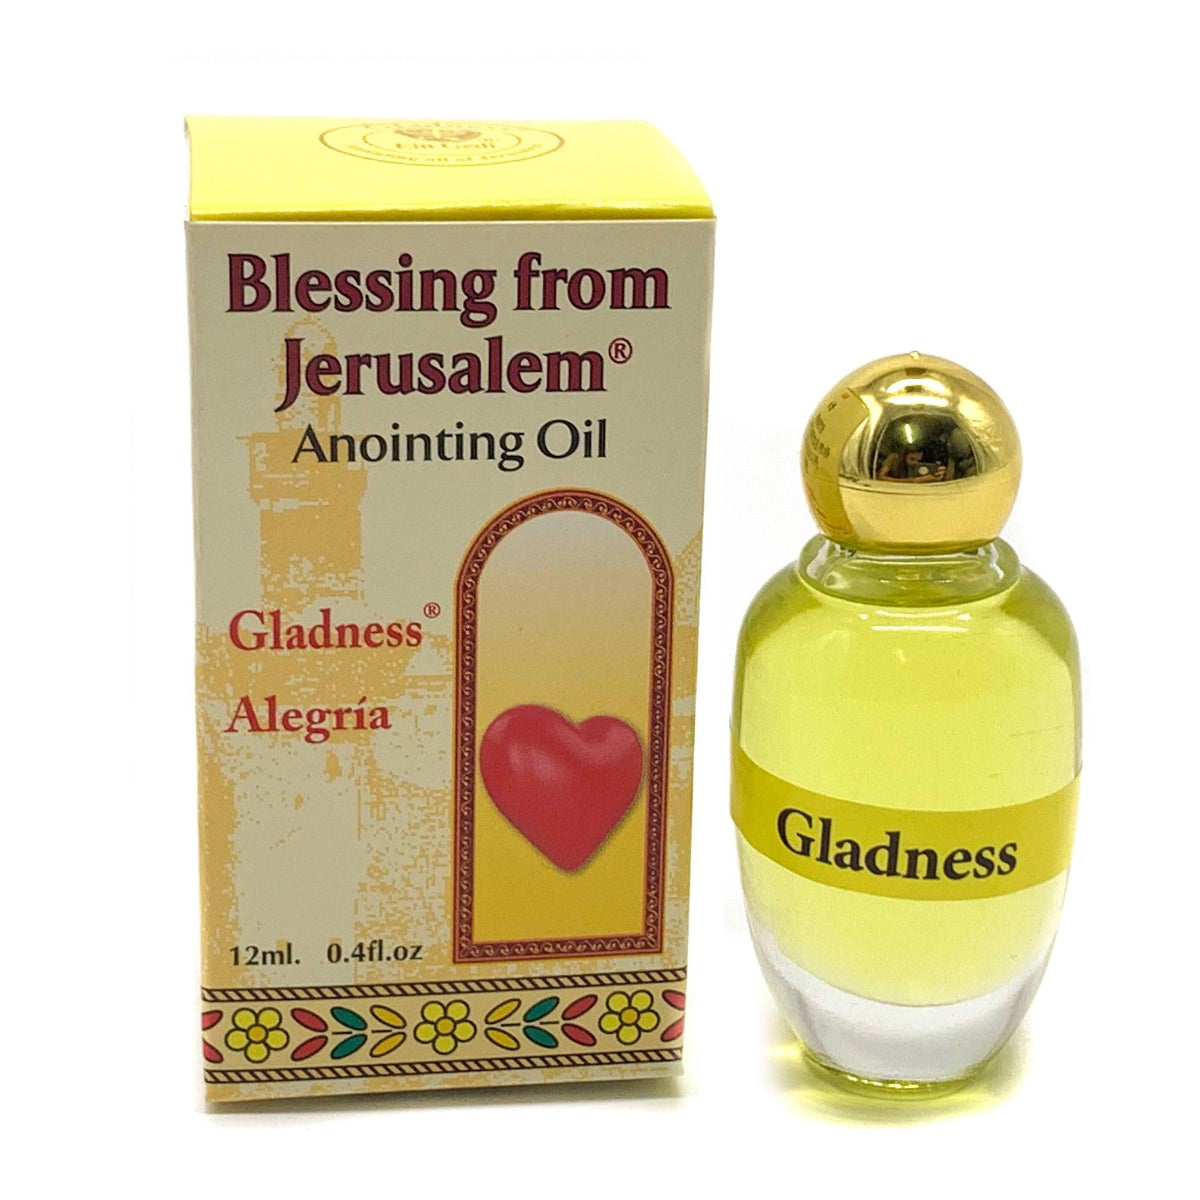 Anointing Oil Gladness 12 ml. - 0.4oz from Jerusalem Israel